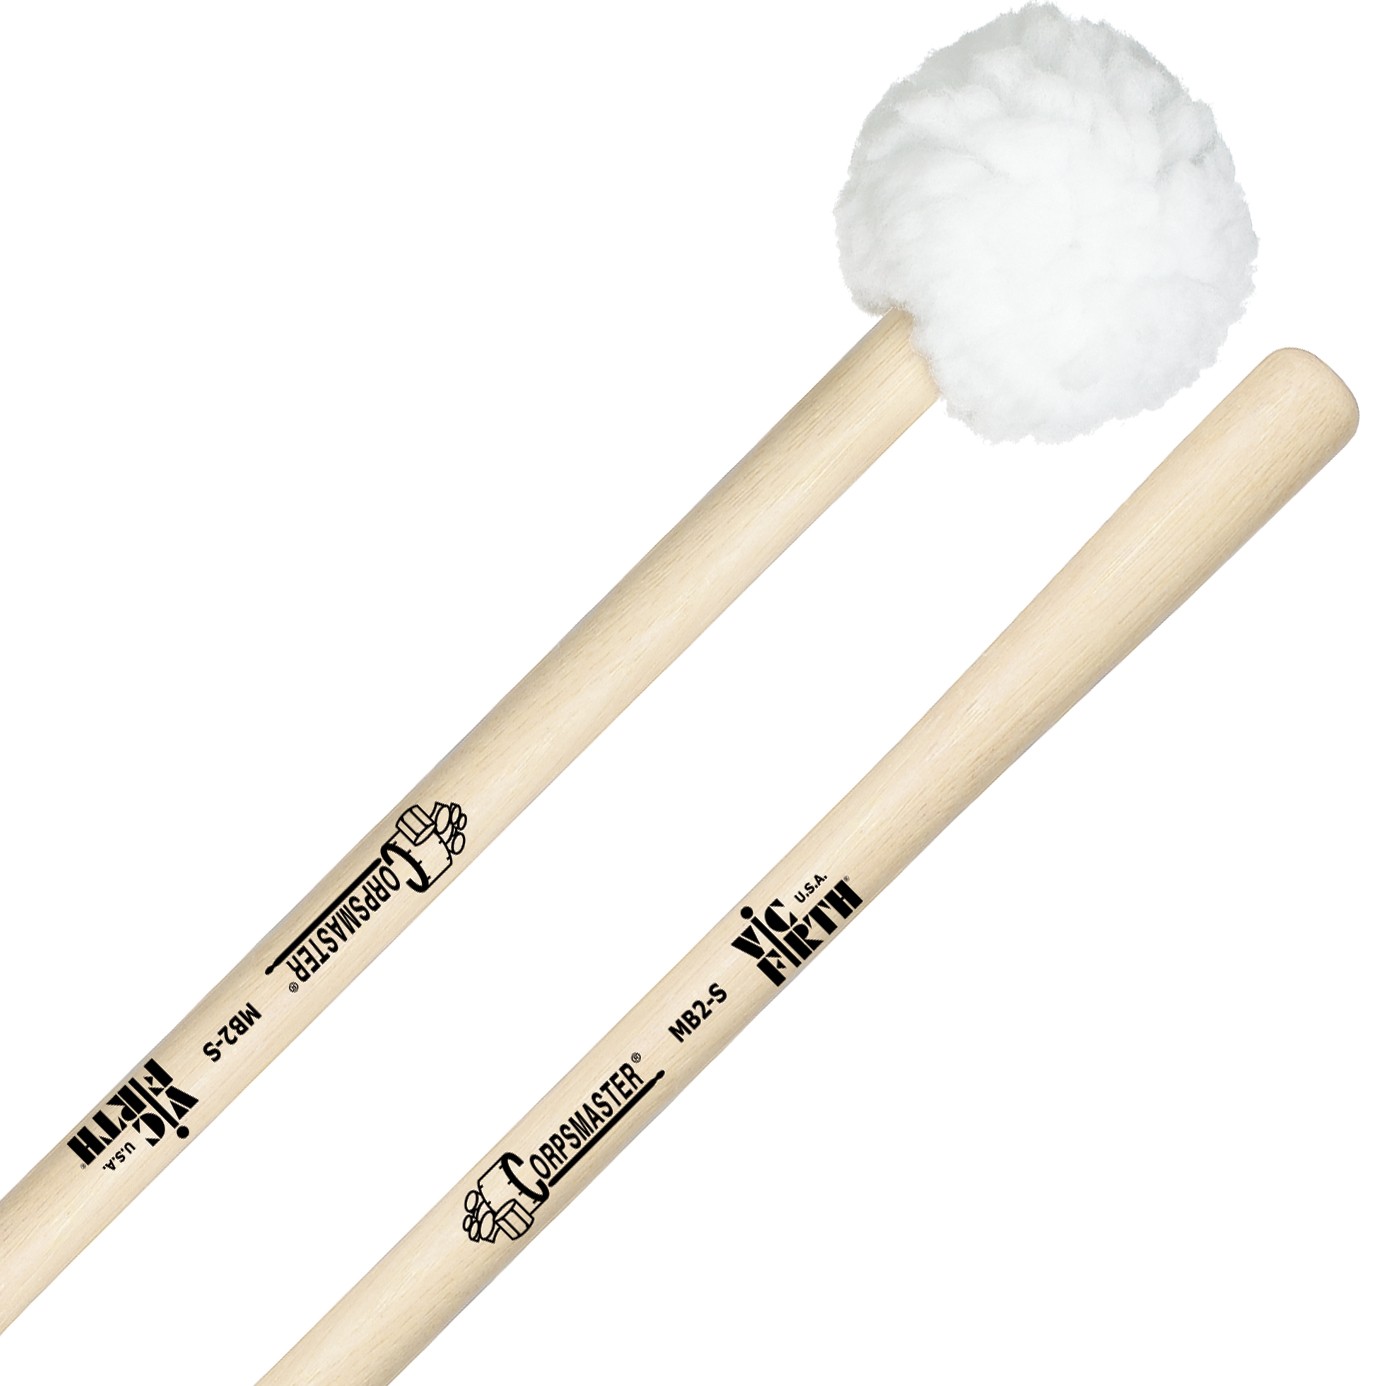 Vic Firth MB2S Corpsmaster Medium Soft Marching Bass mallets